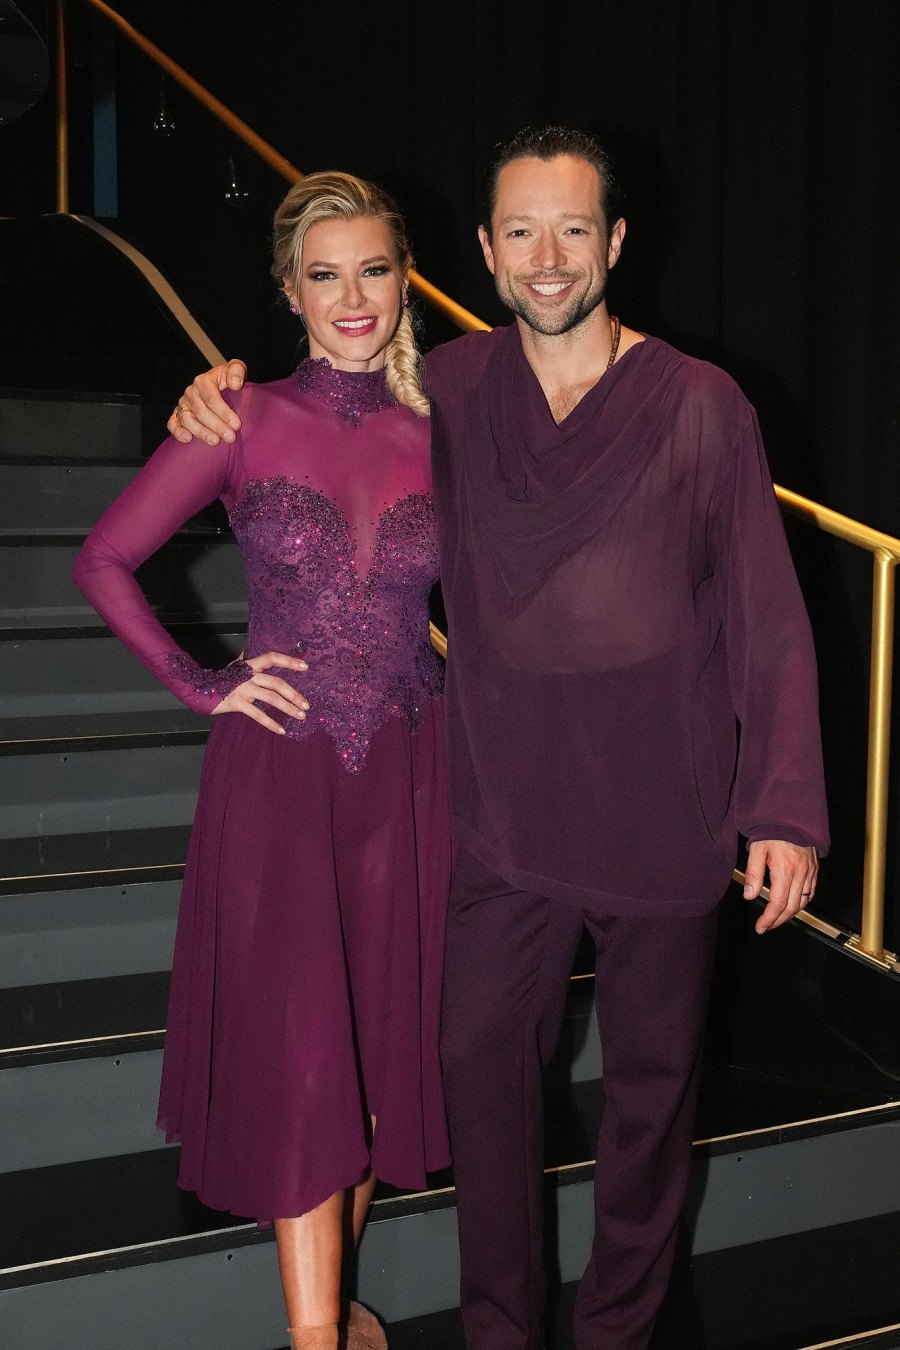 See Who Went Home During Dancing With the Stars Halloween Show